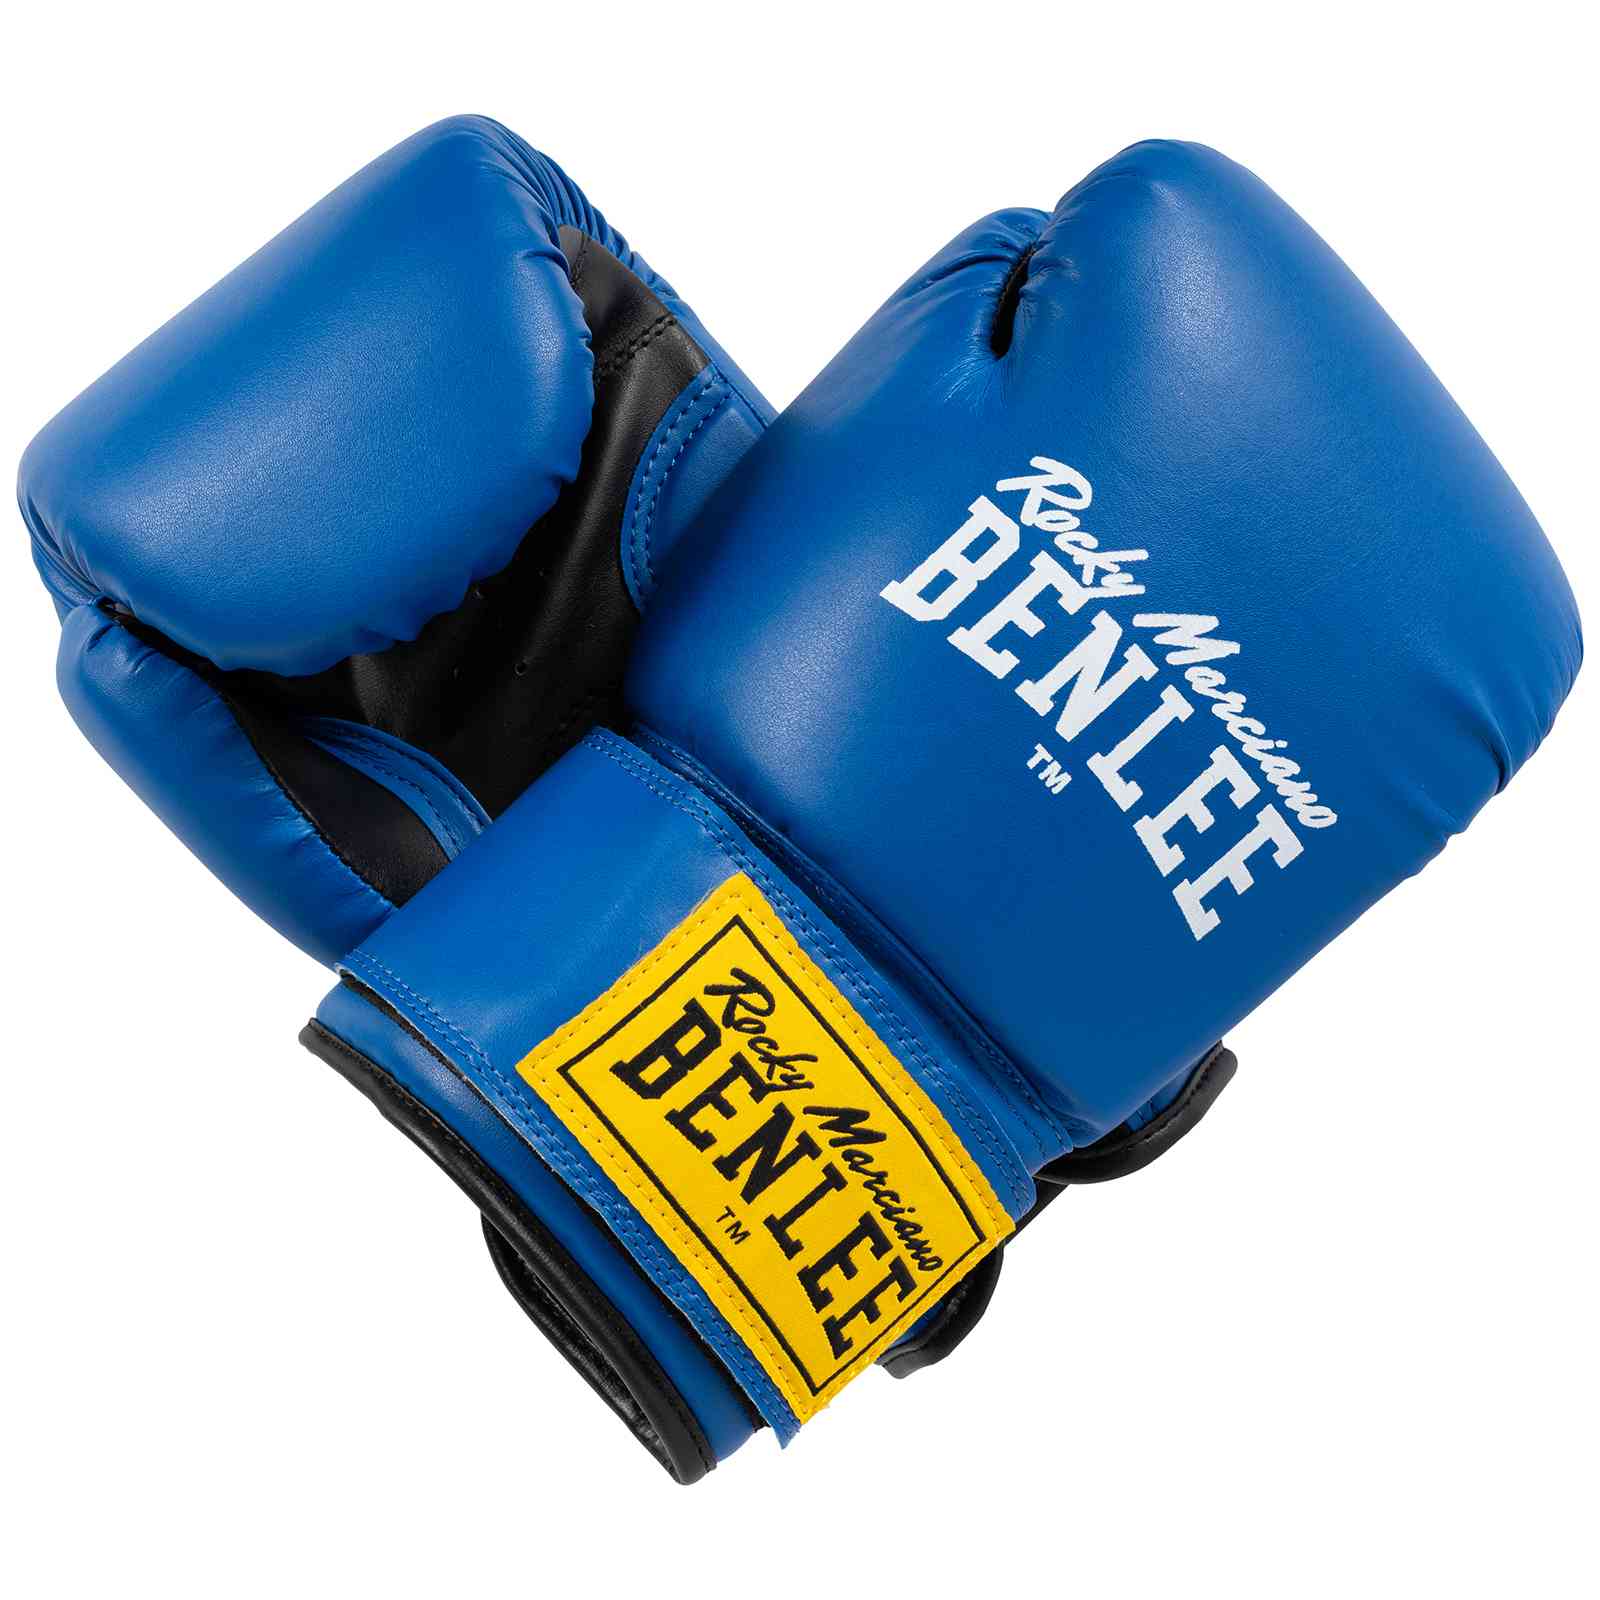 Benlee Rodney Artificial Leather Boxing Gloves, Blue